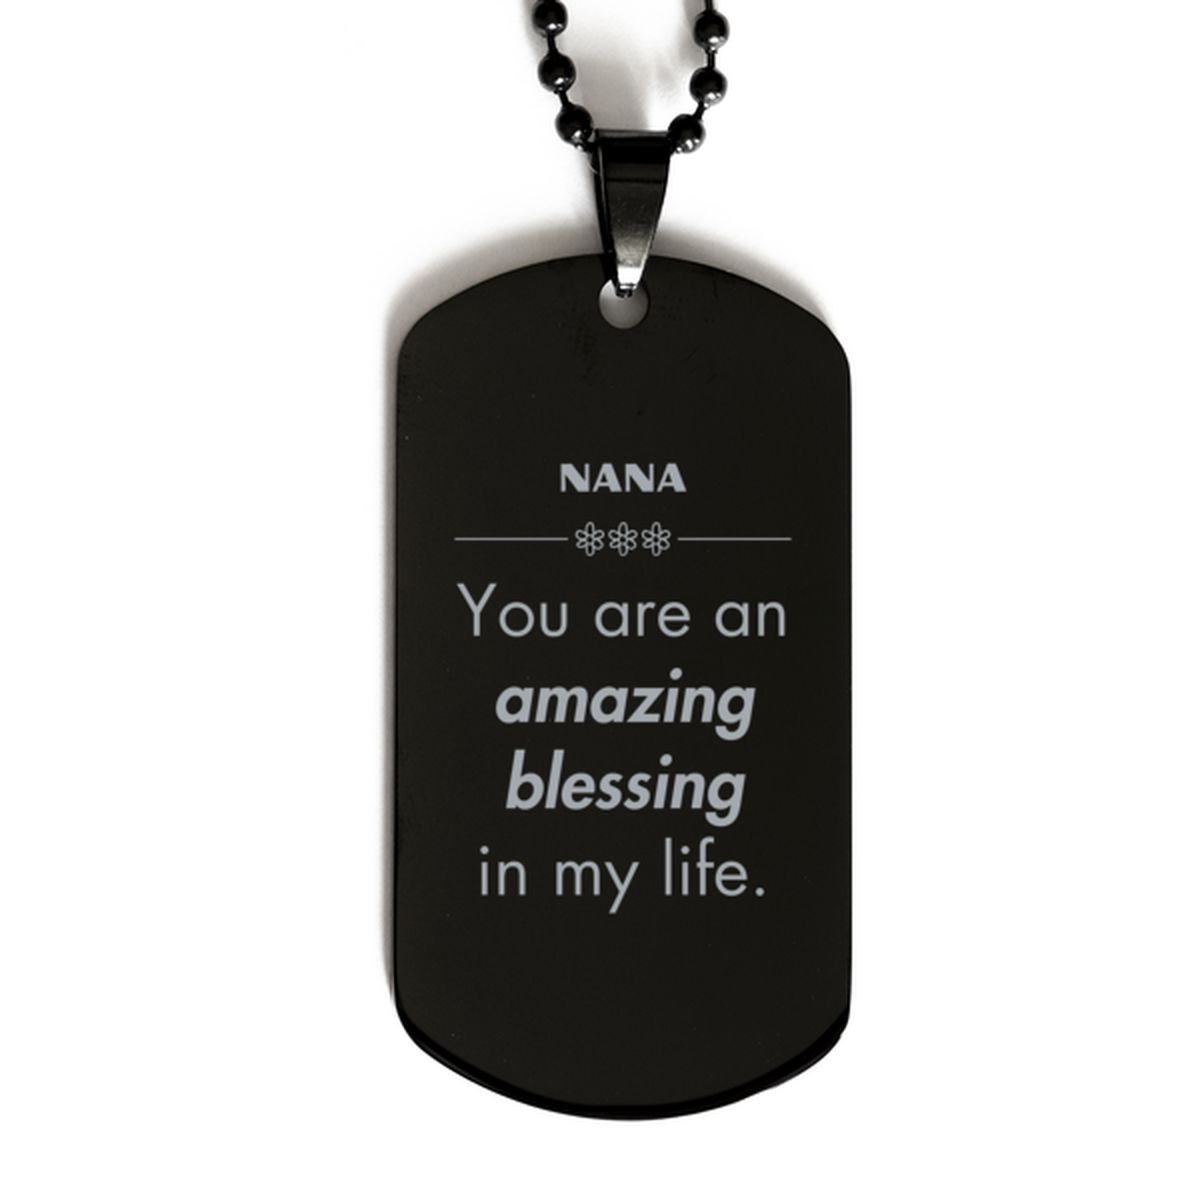 Nana Black Dog Tag, You are an amazing blessing in my life, Thank You Gifts For Nana, Inspirational Birthday Christmas Unique Gifts For Nana